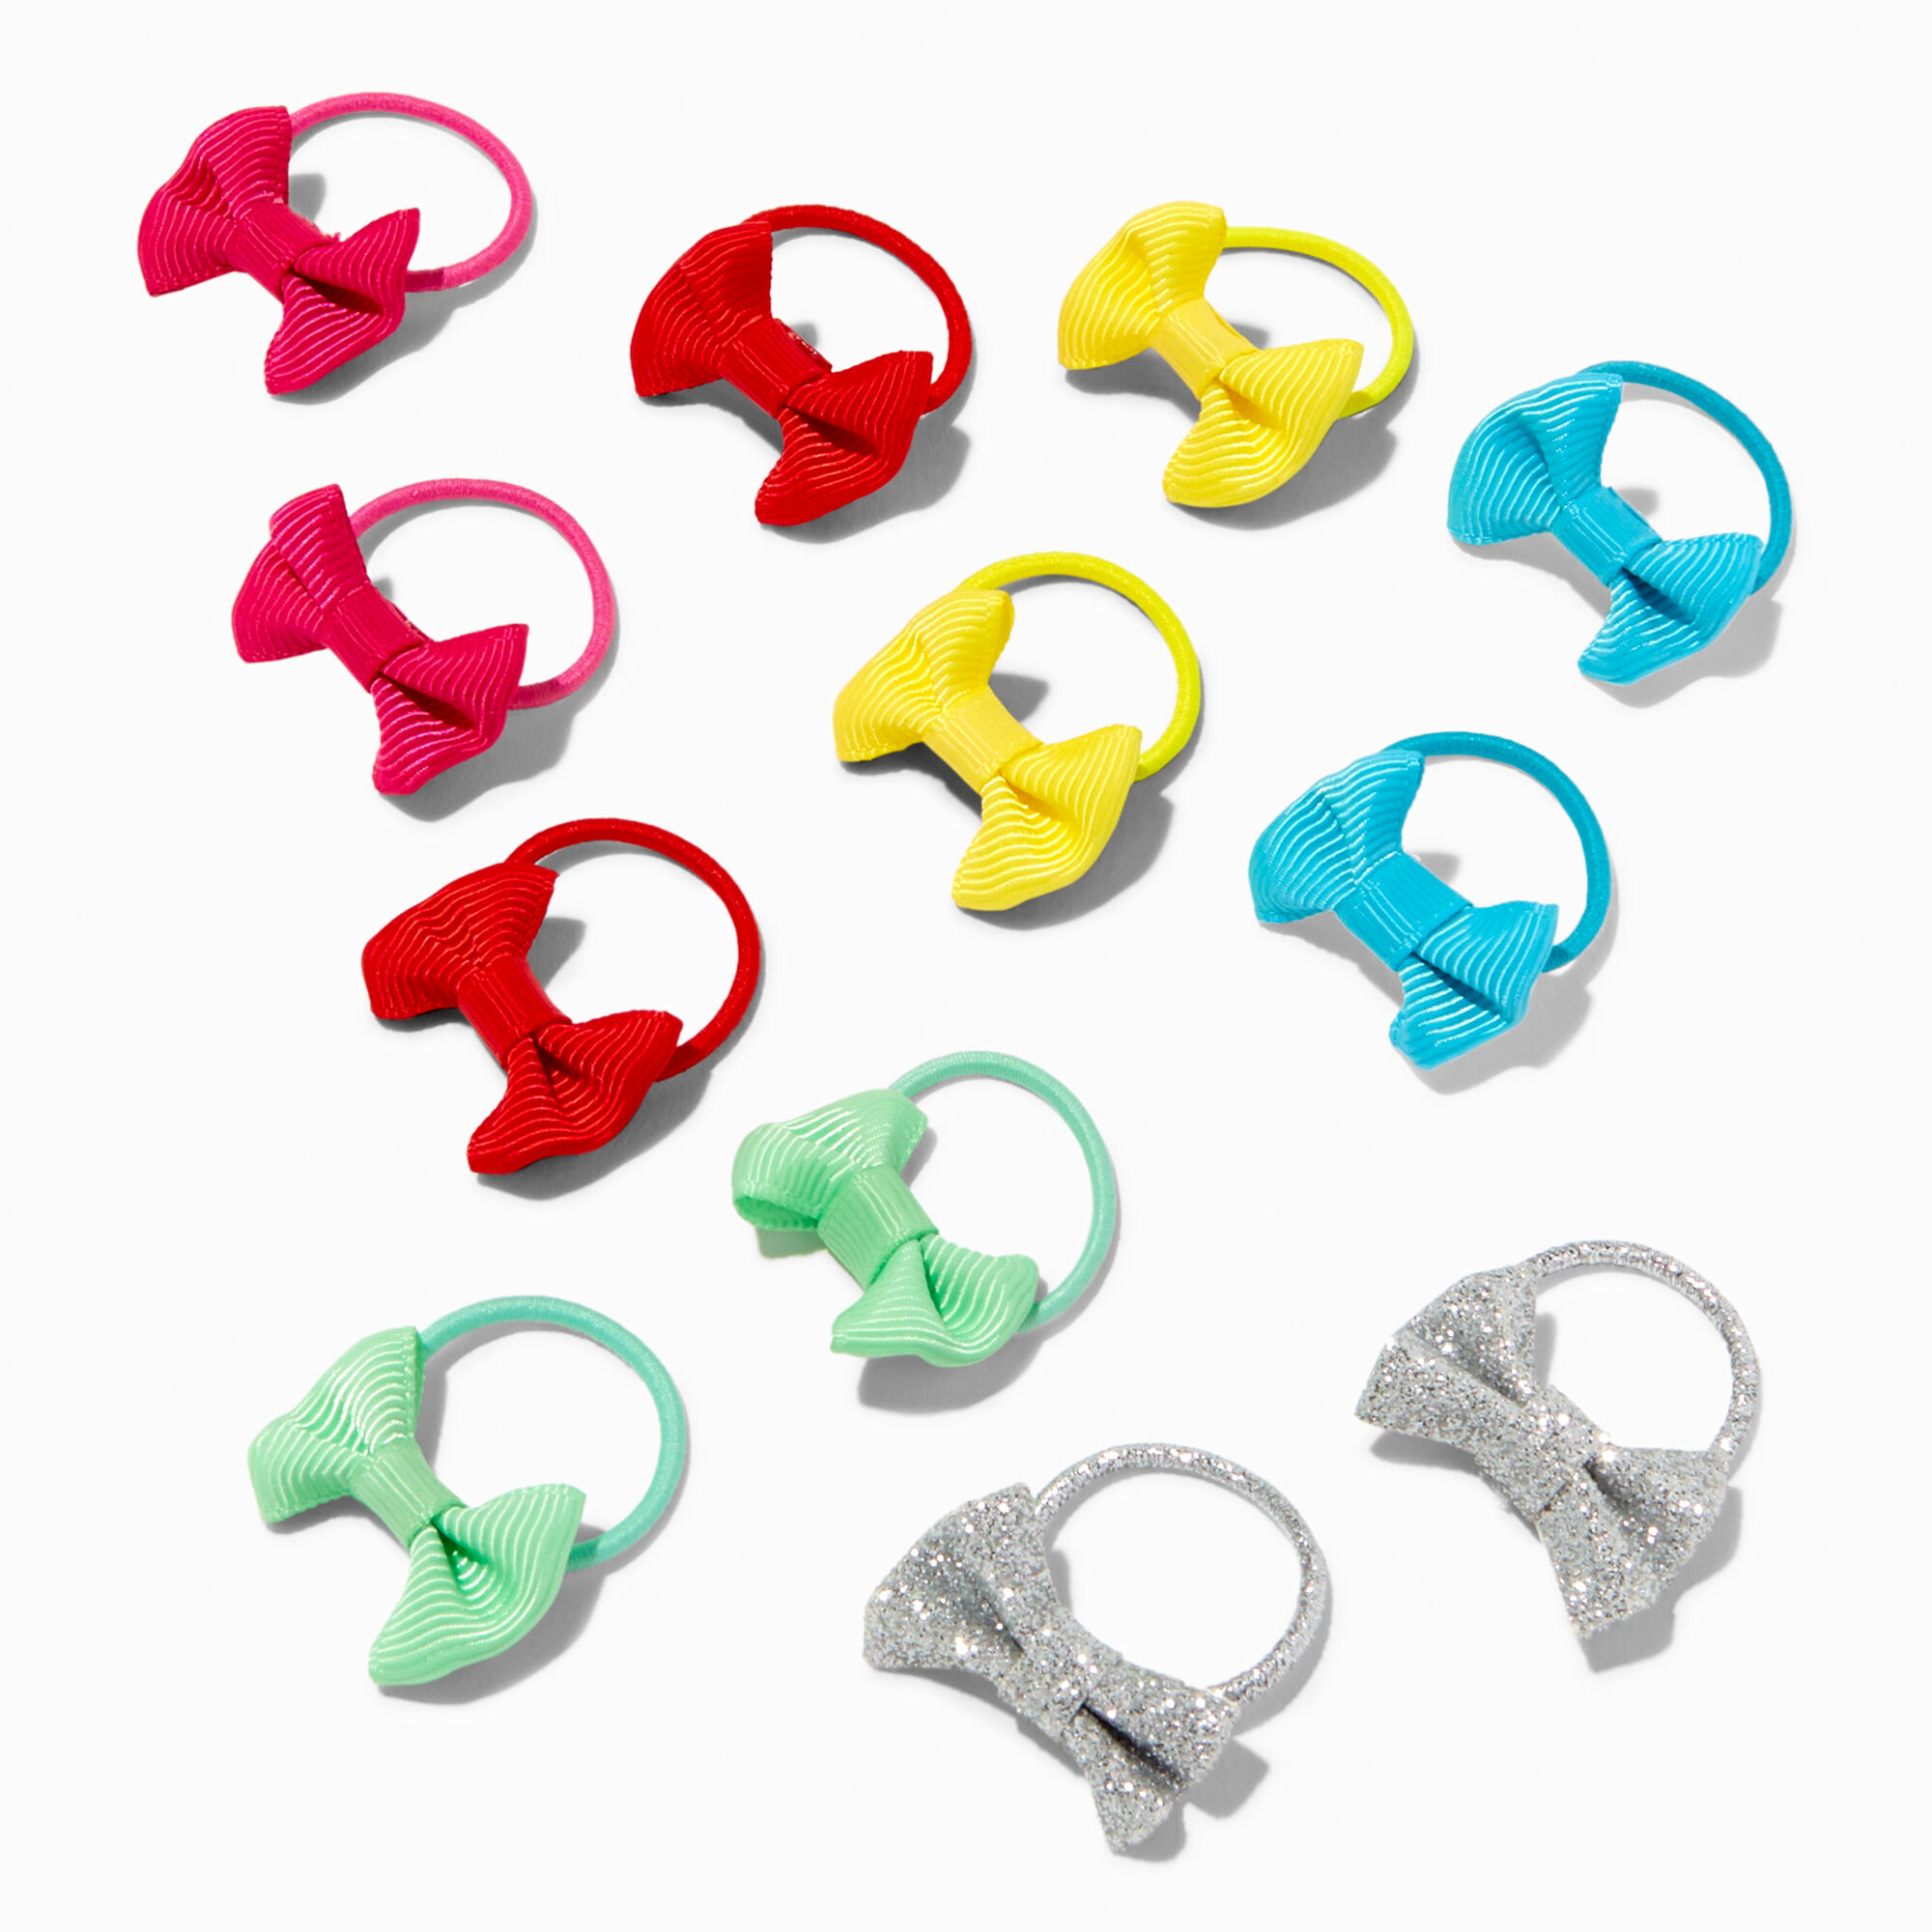 View Claires Club Kidcore Mini Bow Hair Ties 12 Pack information